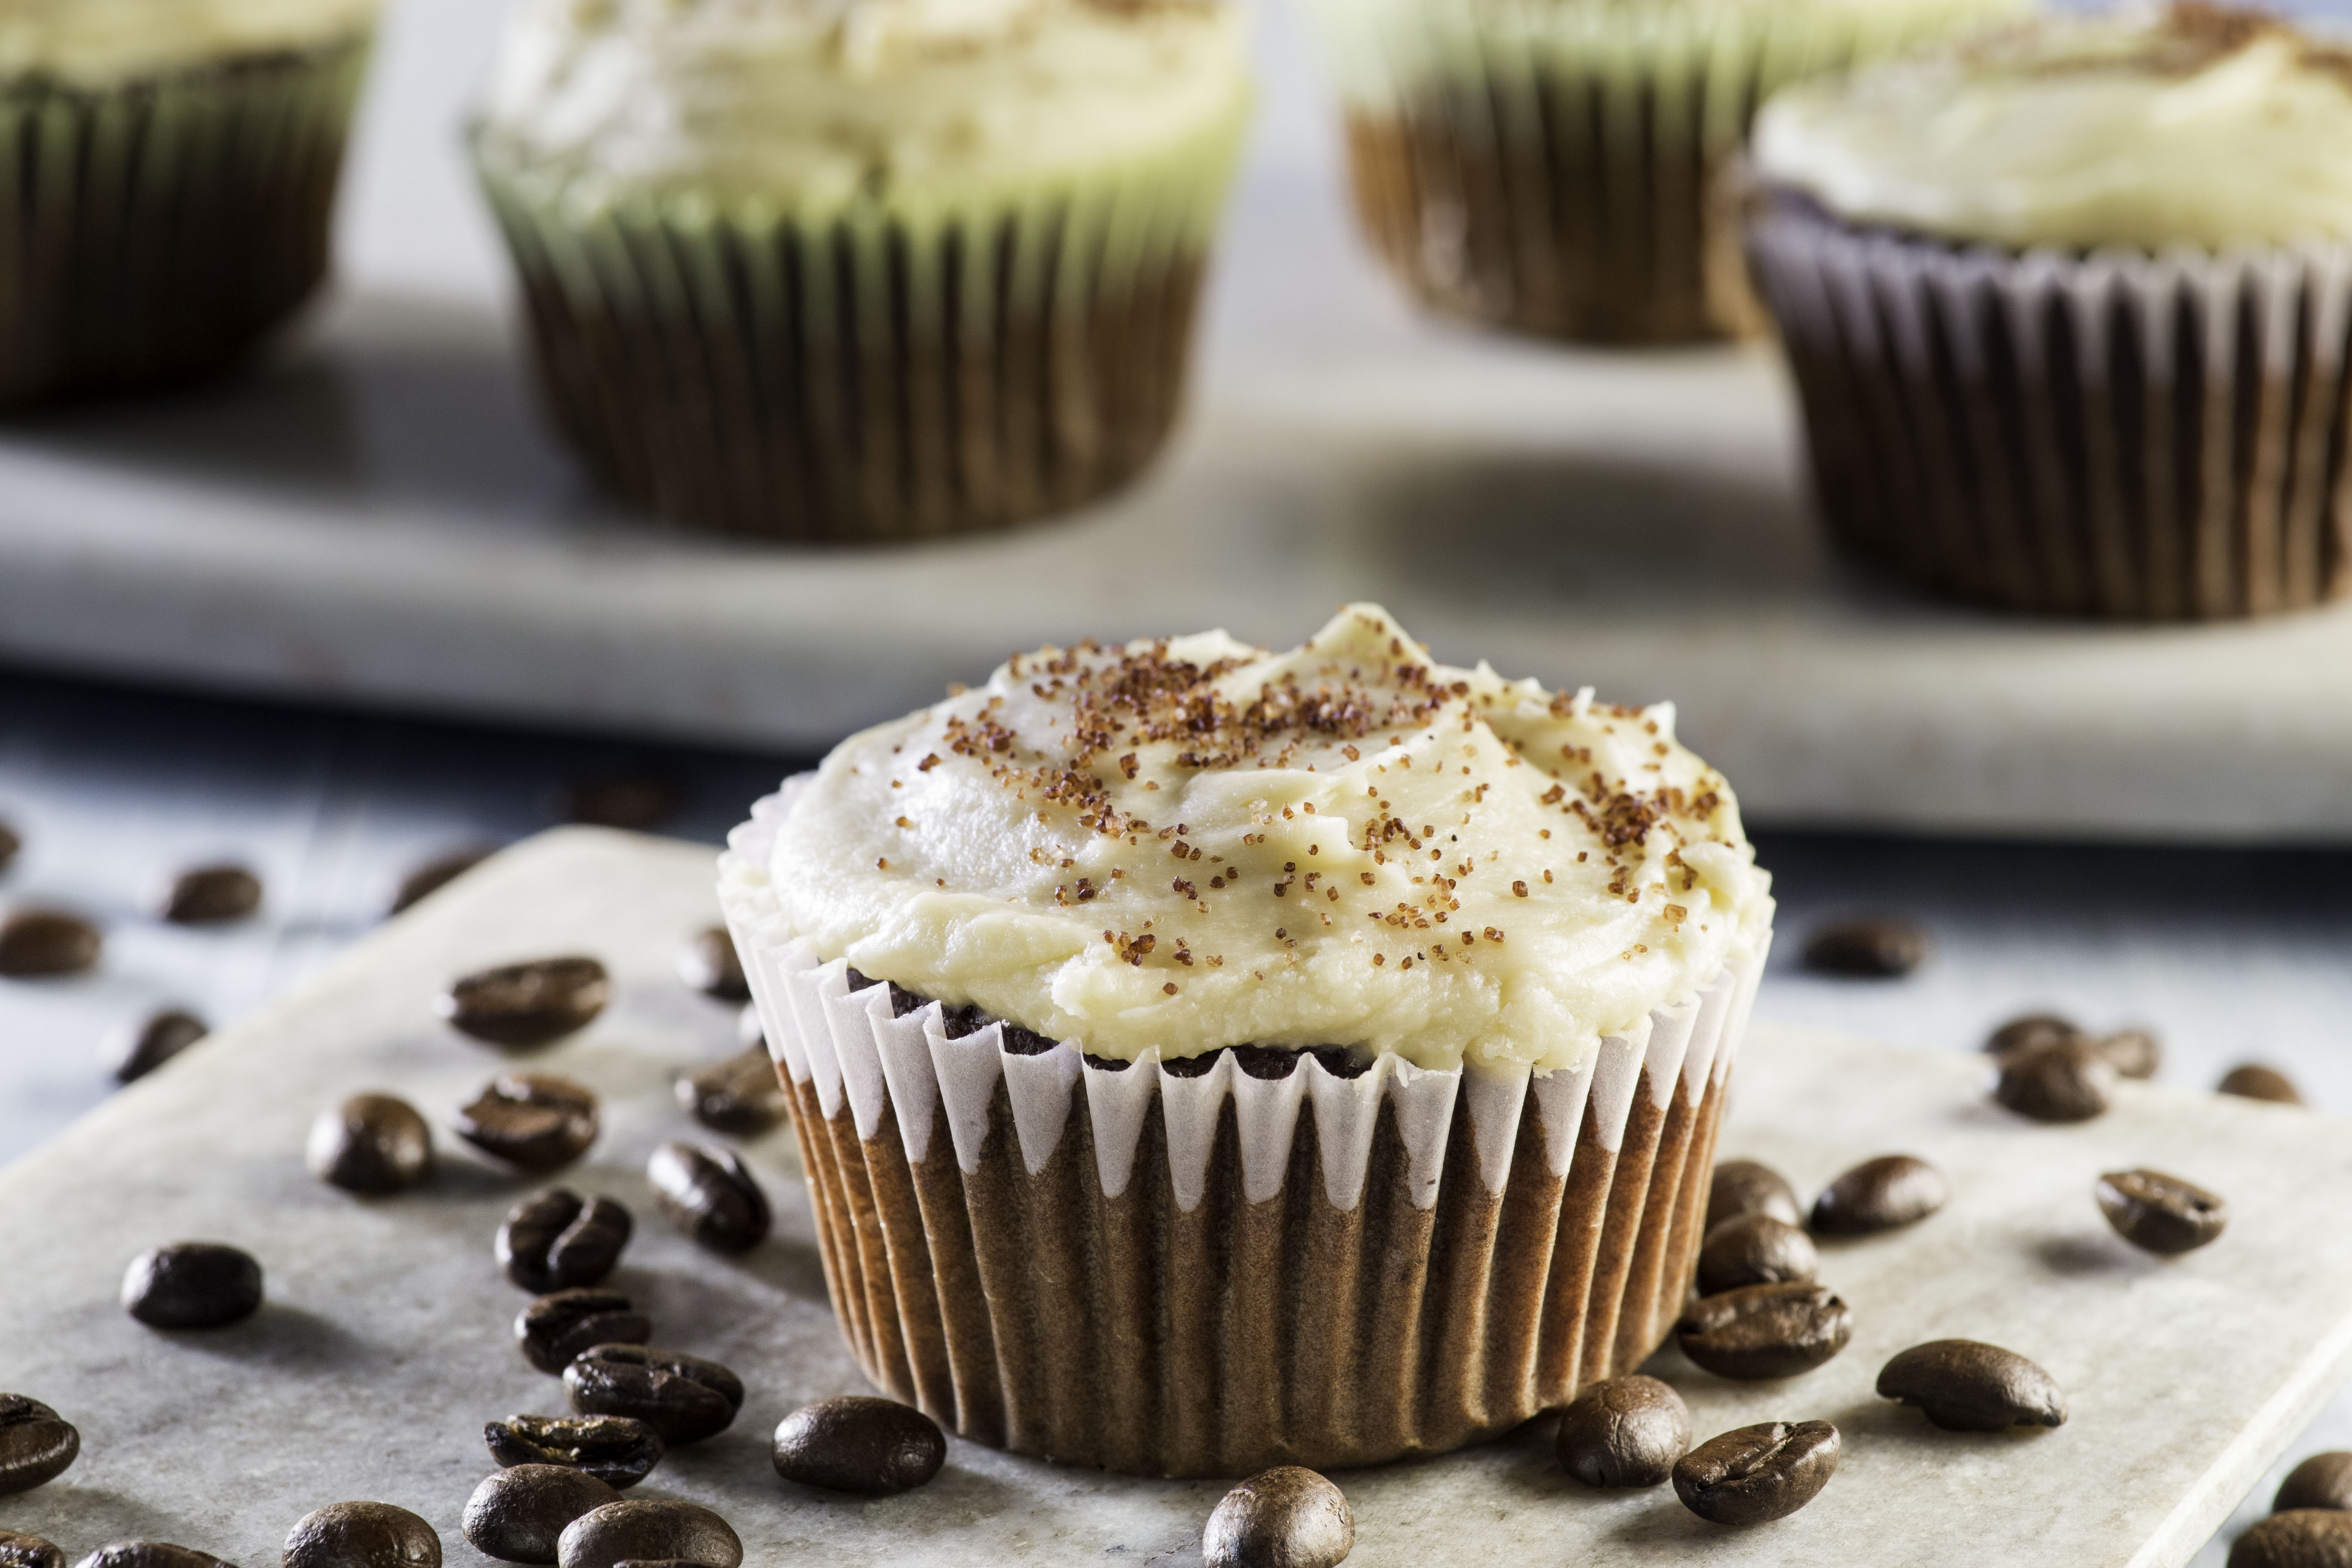 These decadent cupcakes are a winning combination of rich coffee-infused craft beer, chocolate cake, and cold-brew coffee buttercream. This is a half-scratch recipe that can be adapted to taste and will fill the kitchen with a wonderful coffee aroma while baking!